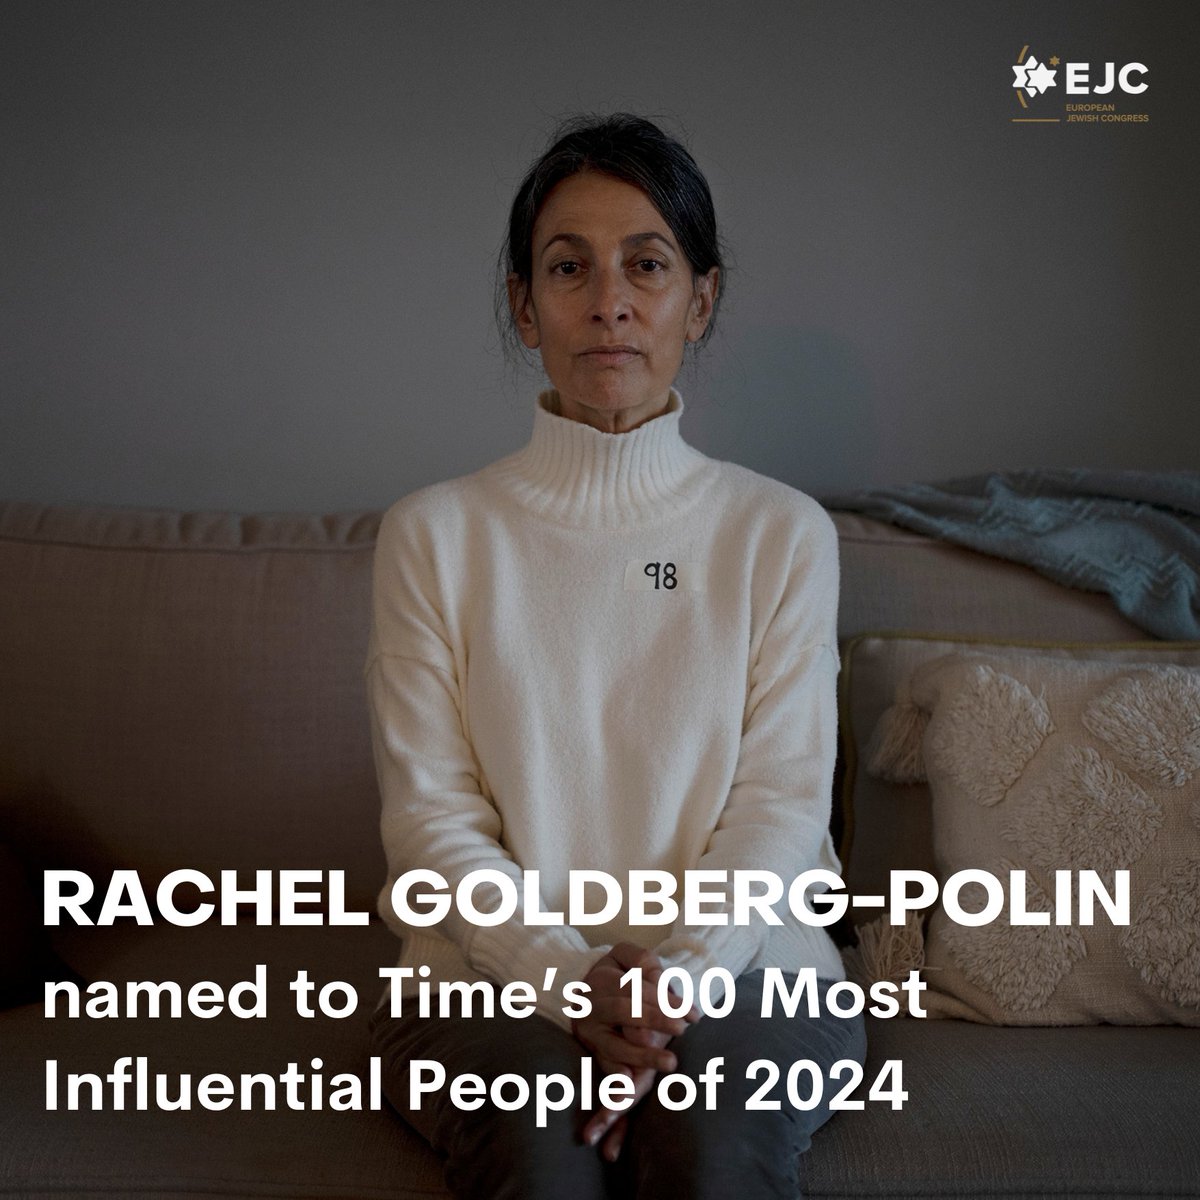 Rachel Goldberg-Polin is one of @TIME's 100 most influential people of the year. Her 23-year-old son Hersh had his arm blown off by a Hamas grenade on October 7 and has been held hostage for 194 days. Rachel has been fighting tirelessly for the release of the 133 hostages.